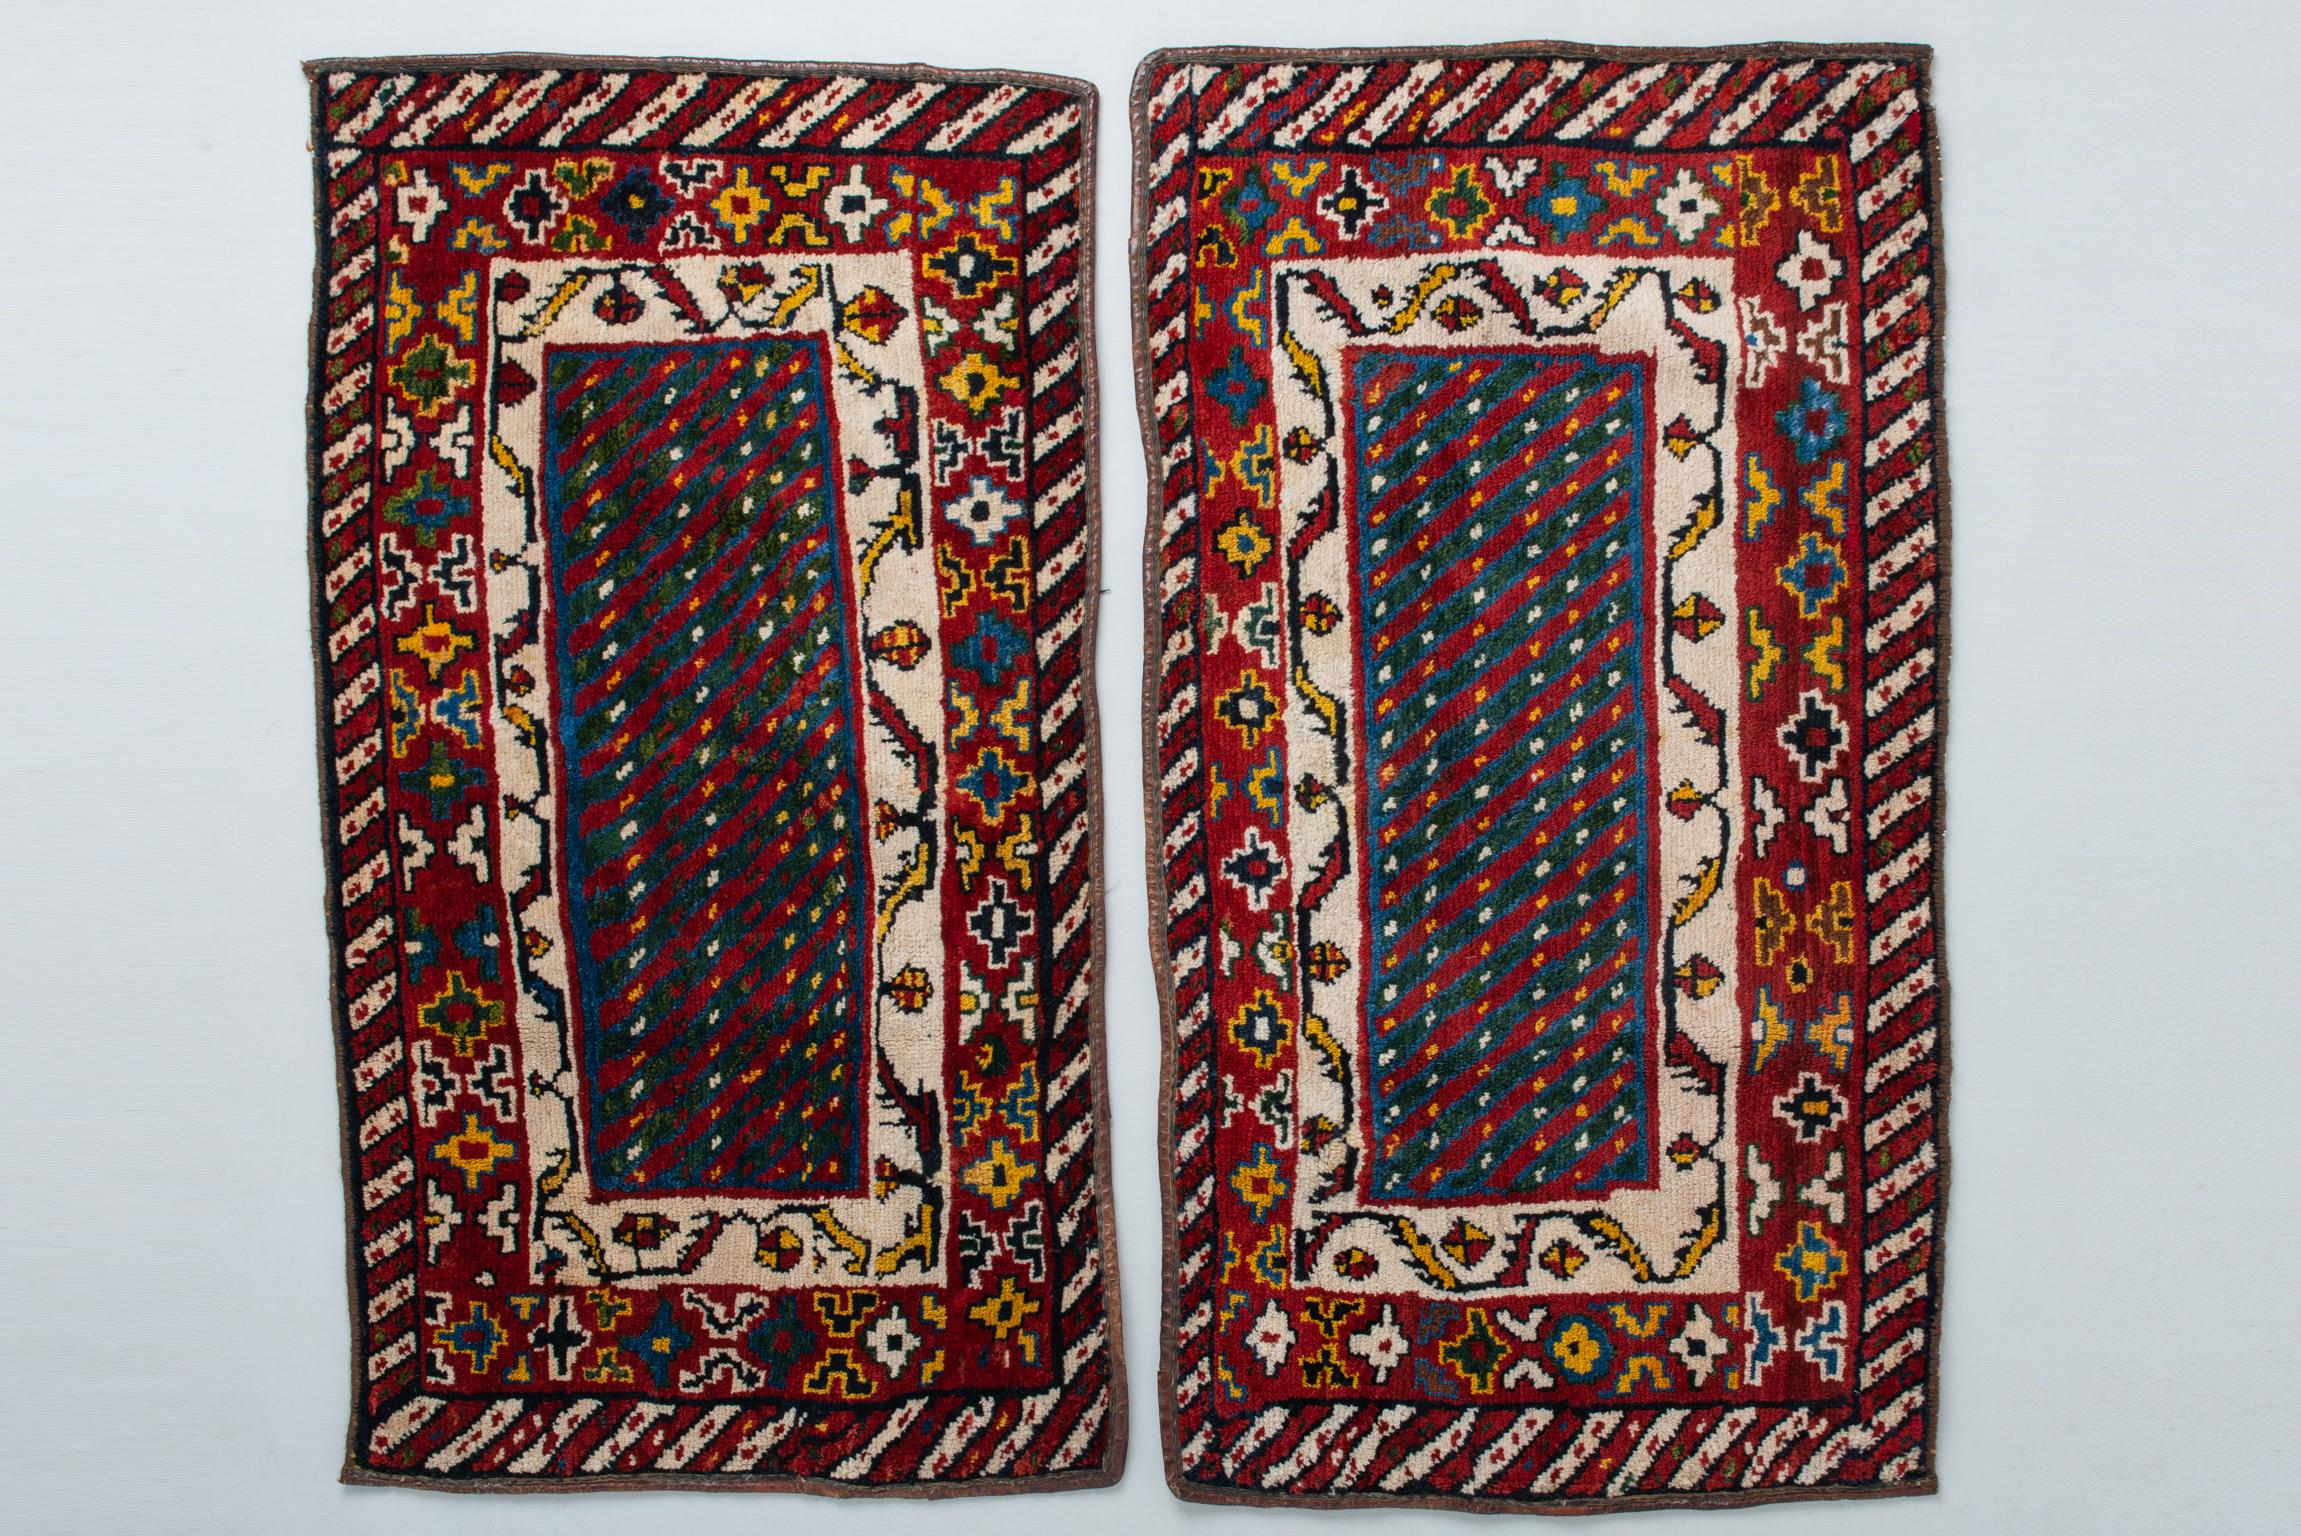 Saddle parts edged in leather, polychrome diagonal design, rich triple border.
To be combined with the carpet published LU (see below) because they were a pair! But this one had the central part (kilim) destroyed, so I had to take it off.
The